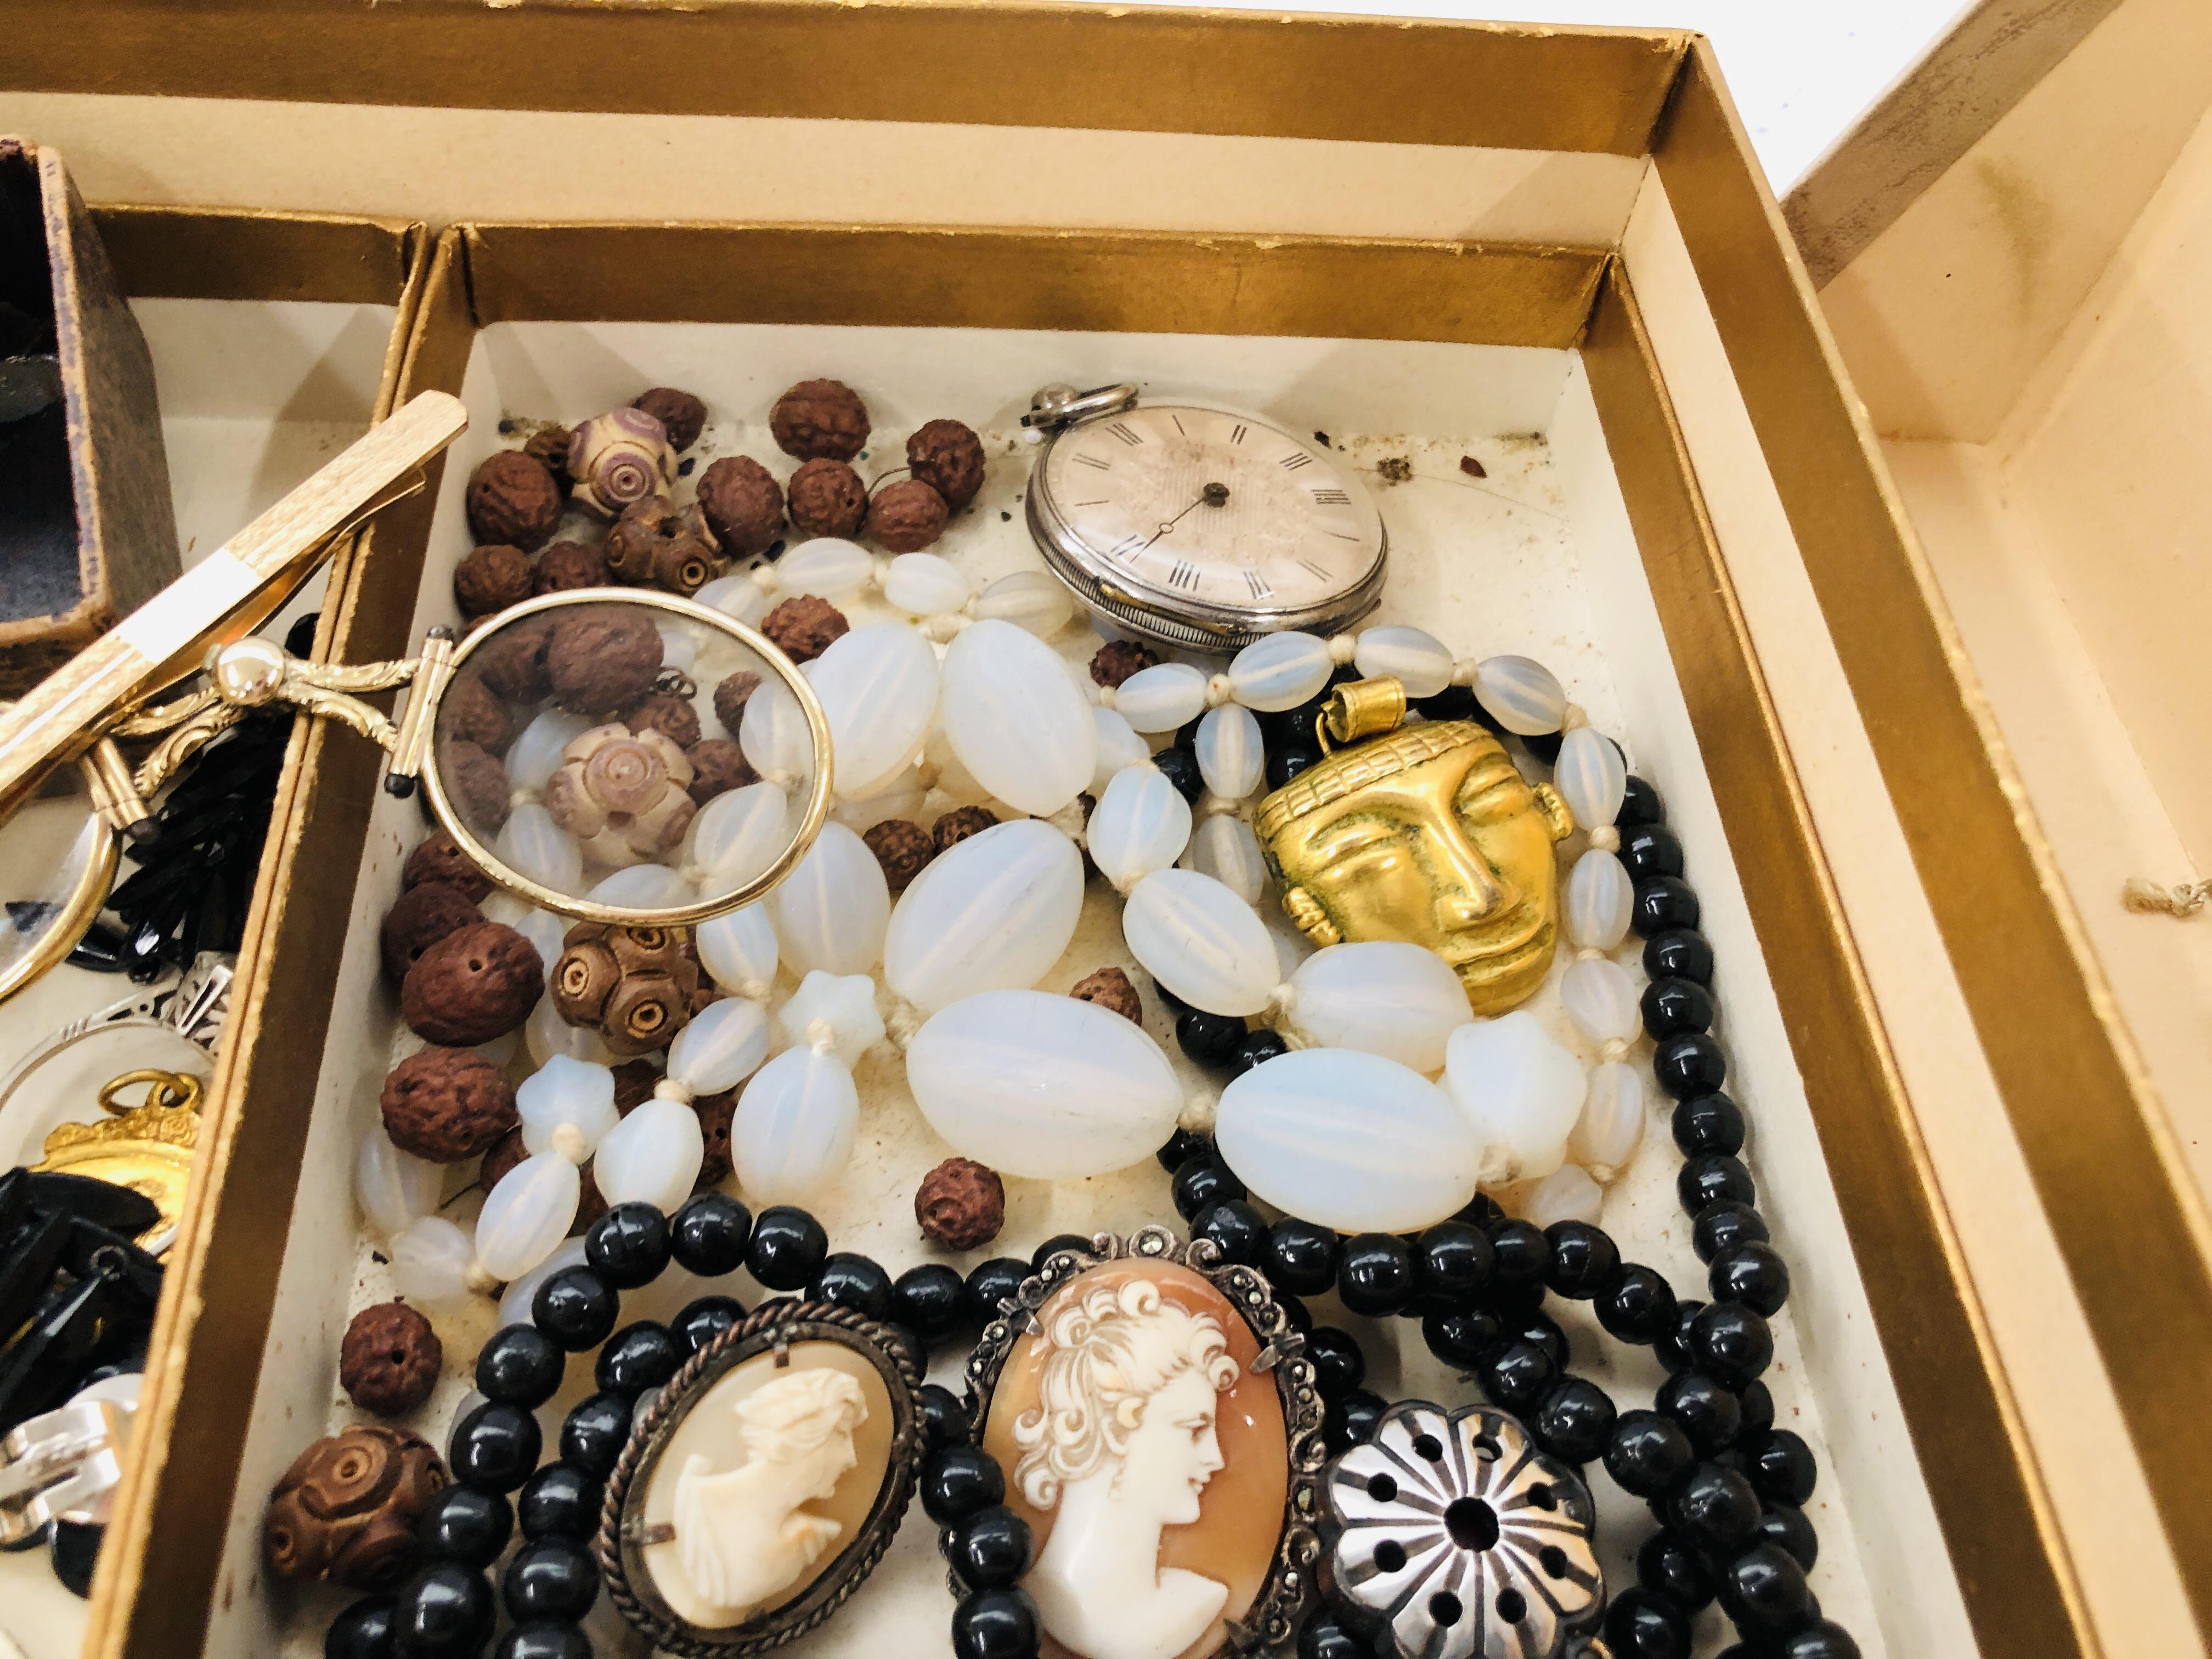 BOX OF VINTAGE COSTUME JEWELLERY TO INCLUDE CAMEO BROOCH, WATCH, LORGNETTE, RINGS, ETC. - Image 3 of 5